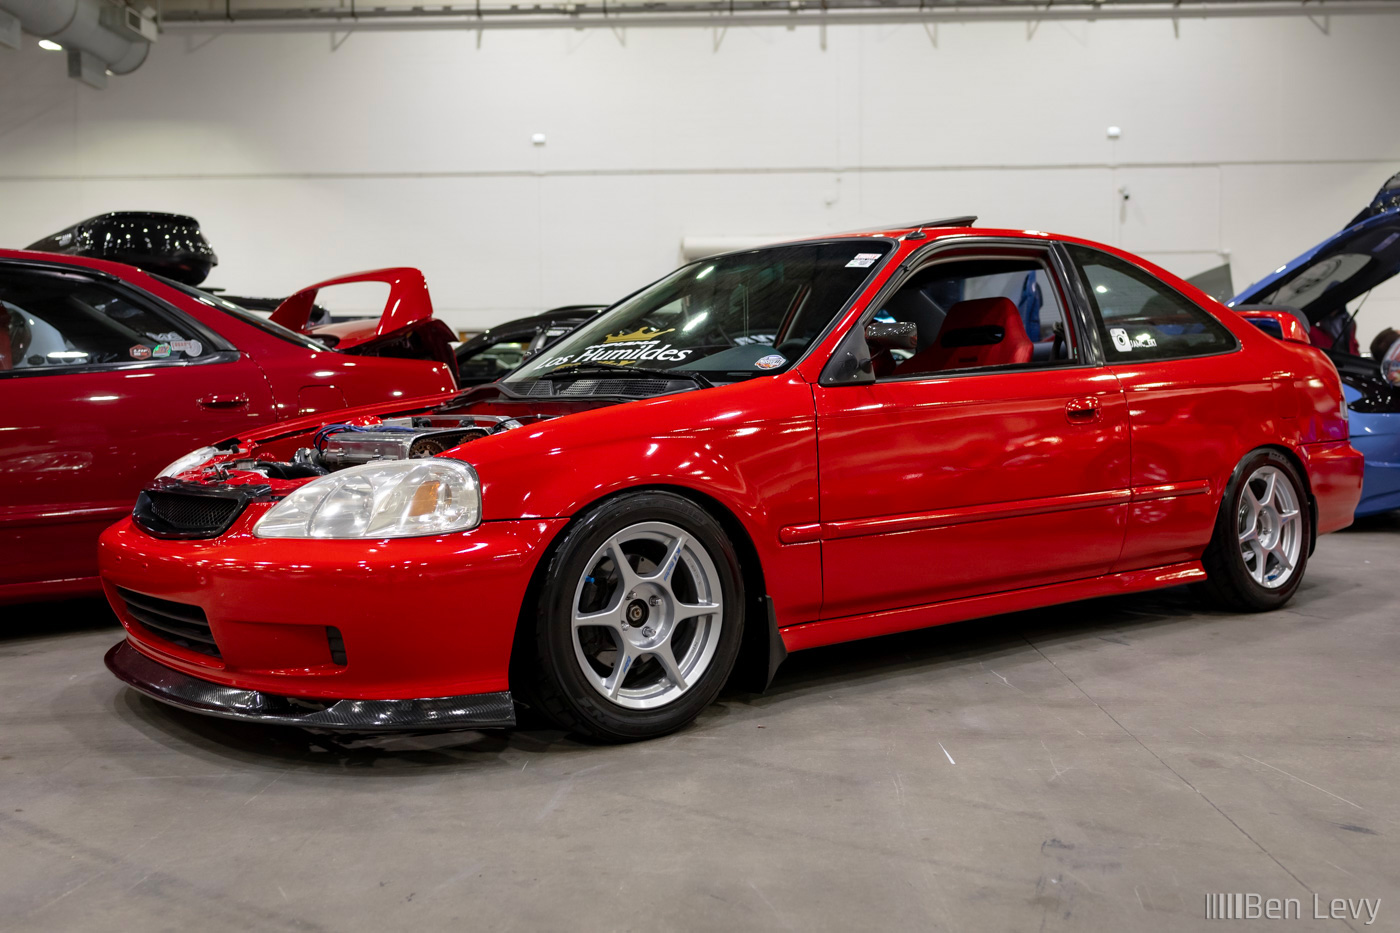 Red Honda Civic coupe at Wekfest Chicago